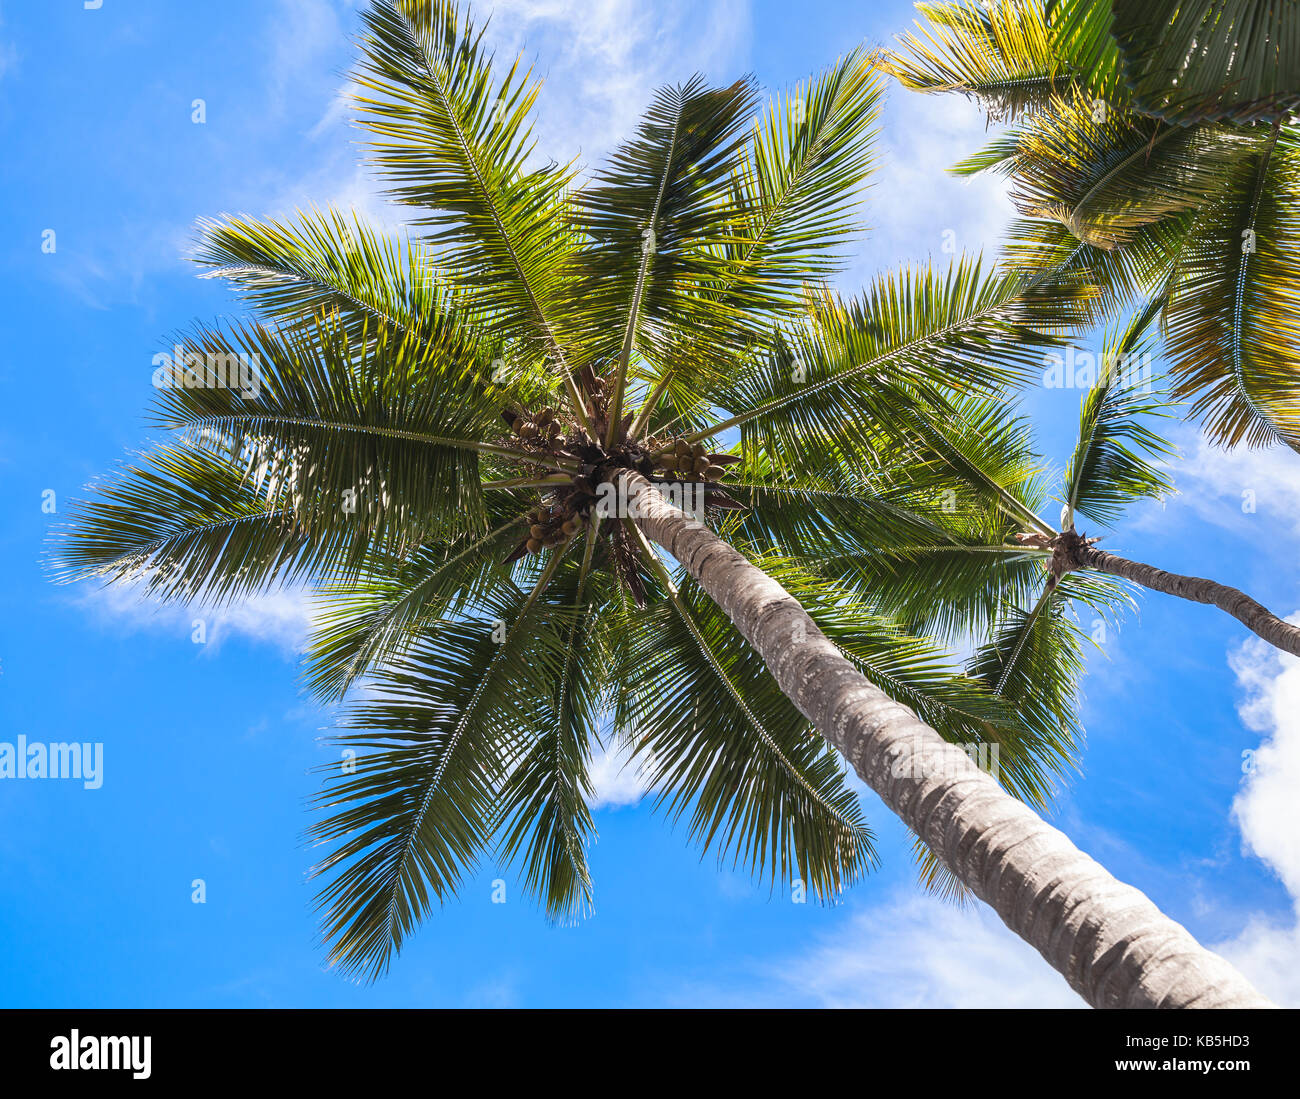 Coconut palm trees under blue cloudy sky, tropical nature background, Dominican republic Stock Photo